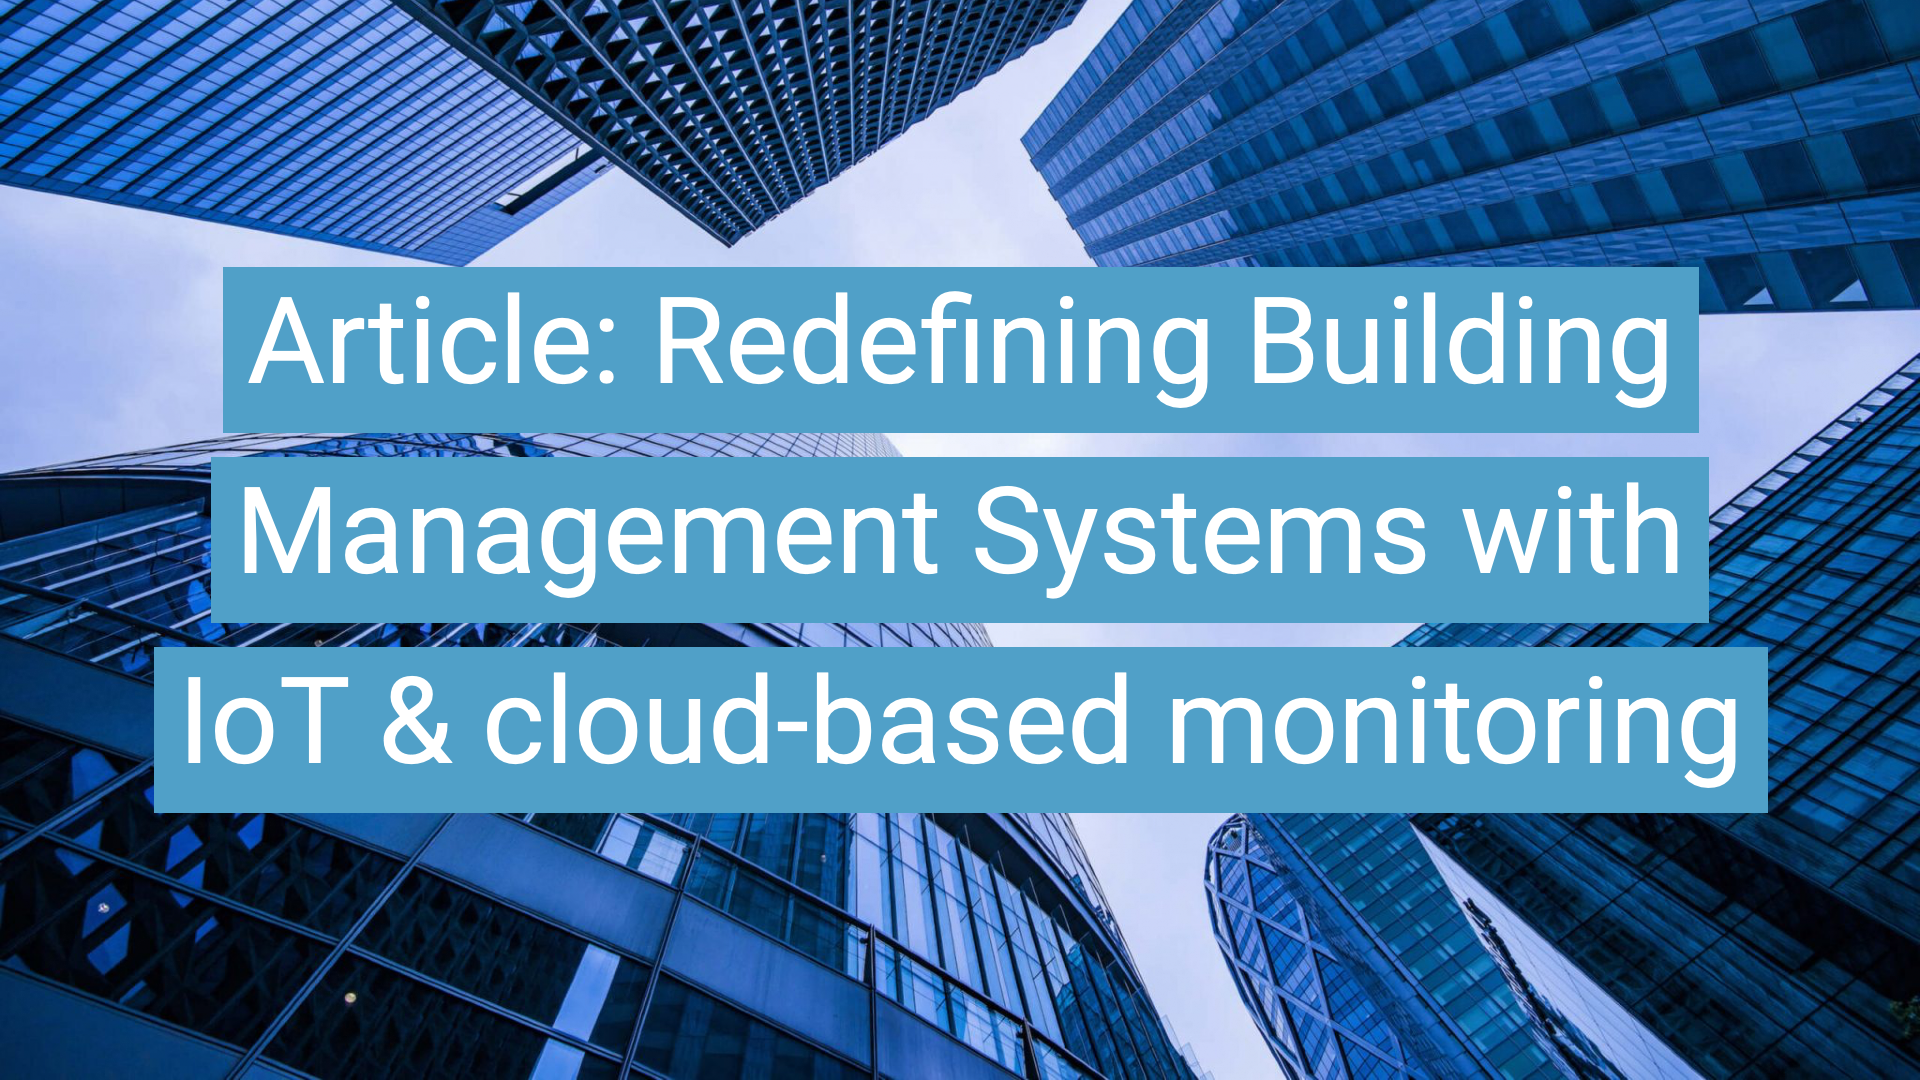 Redefining Building Management Systems with IoT & cloud-based monitoring